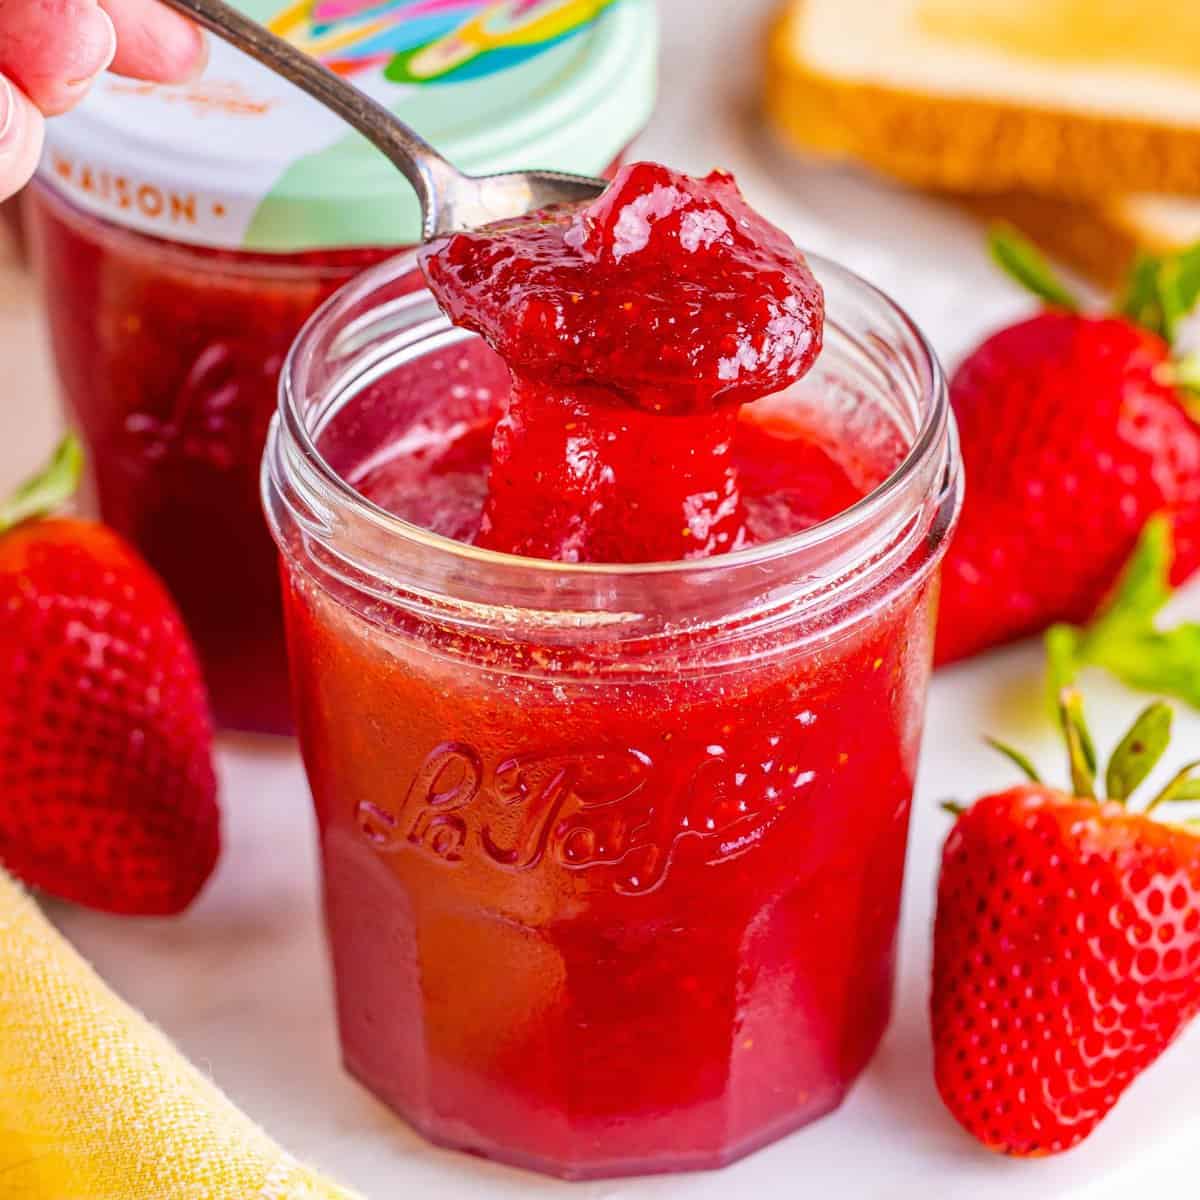 Homemade Strawberry Jam (with fresh or frozen berries)